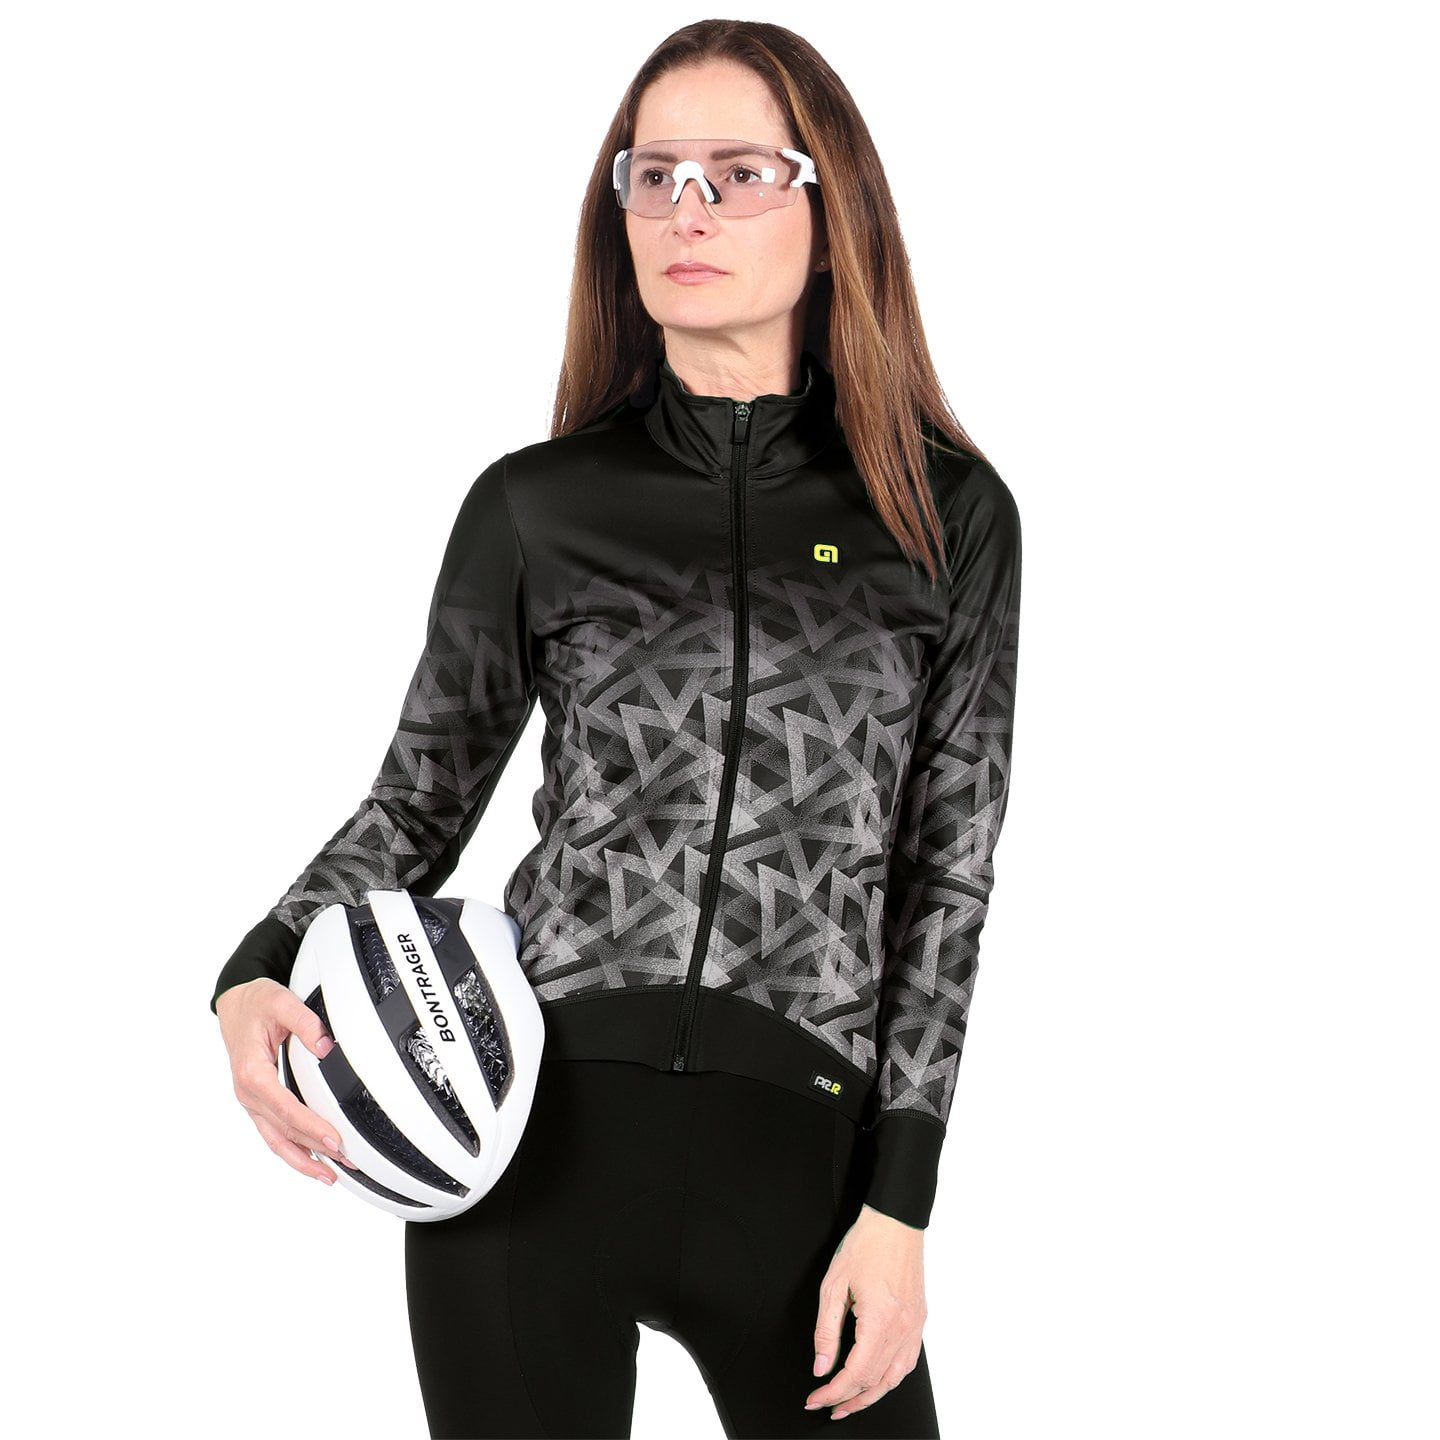 ALE Pyramid Women’s Winter Jacket Women’s Thermal Jacket, size XL, Winter jacket, Cycling clothes